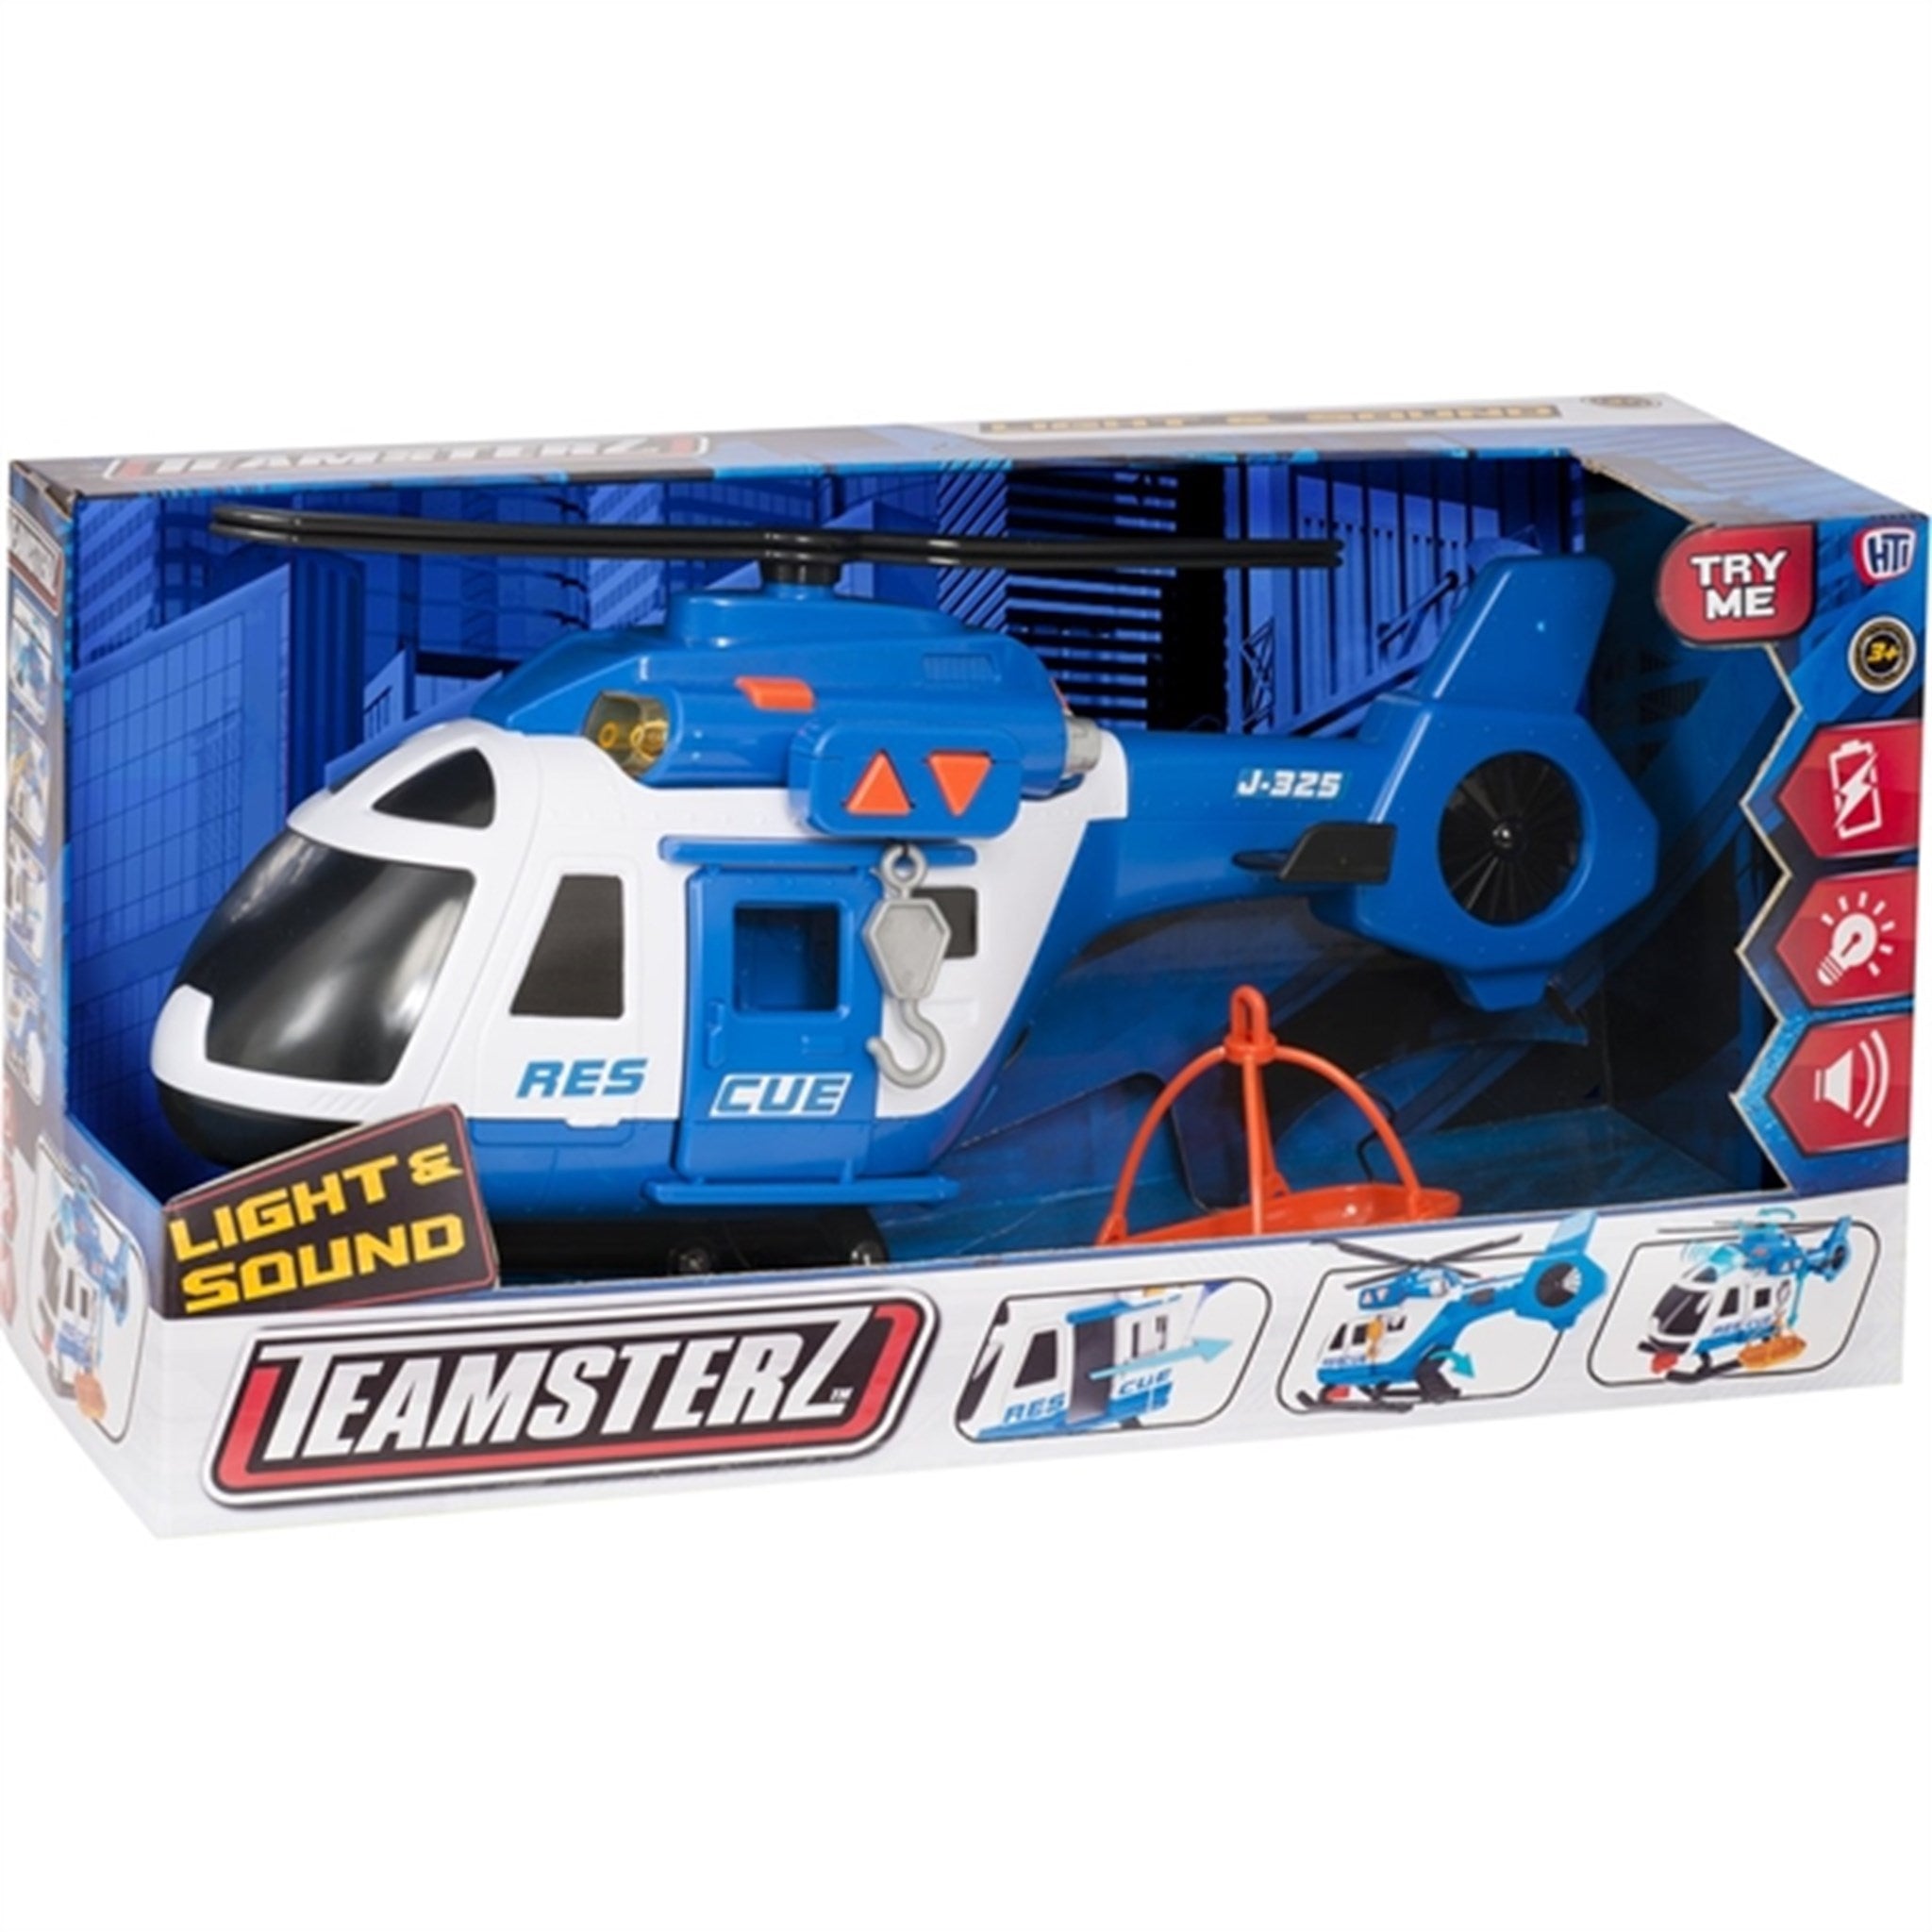 Teamsterz Large L&S Helicopter 2